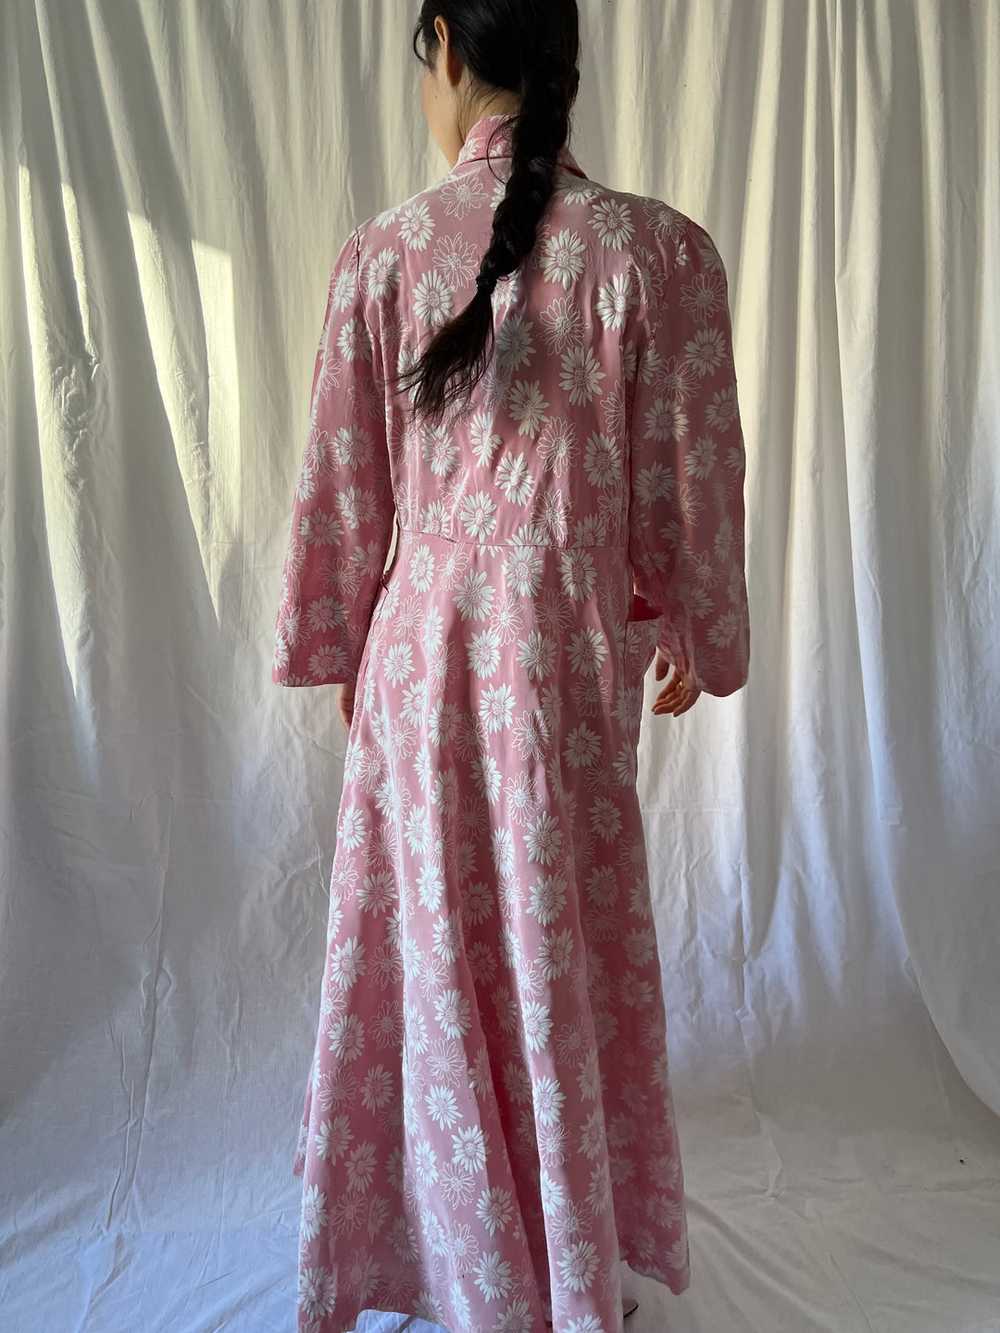 Vintage 1930s pink daisies gown robe - image 5